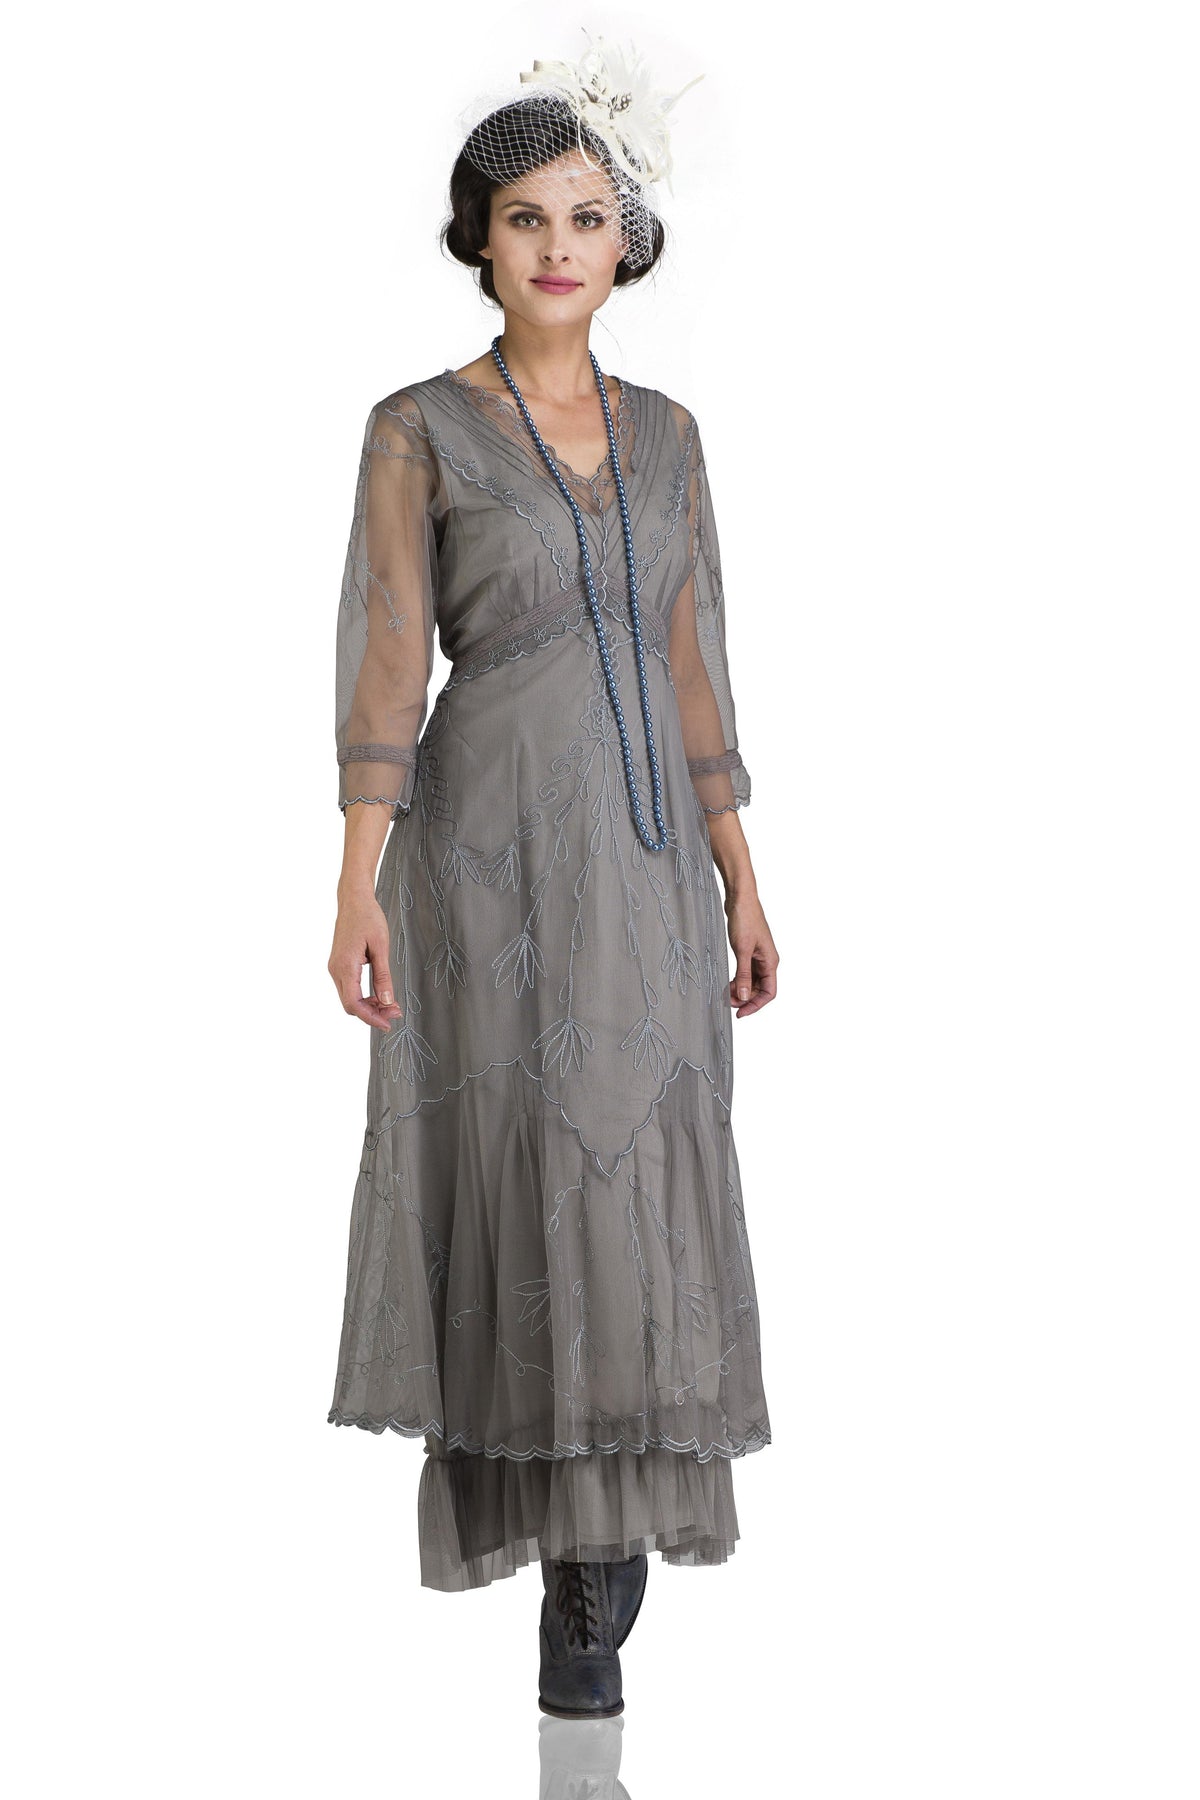 Steampunk Dresses | Women & Girl Costumes Somewhere in Time Dress in Smoke by Nataya $265.00 AT vintagedancer.com